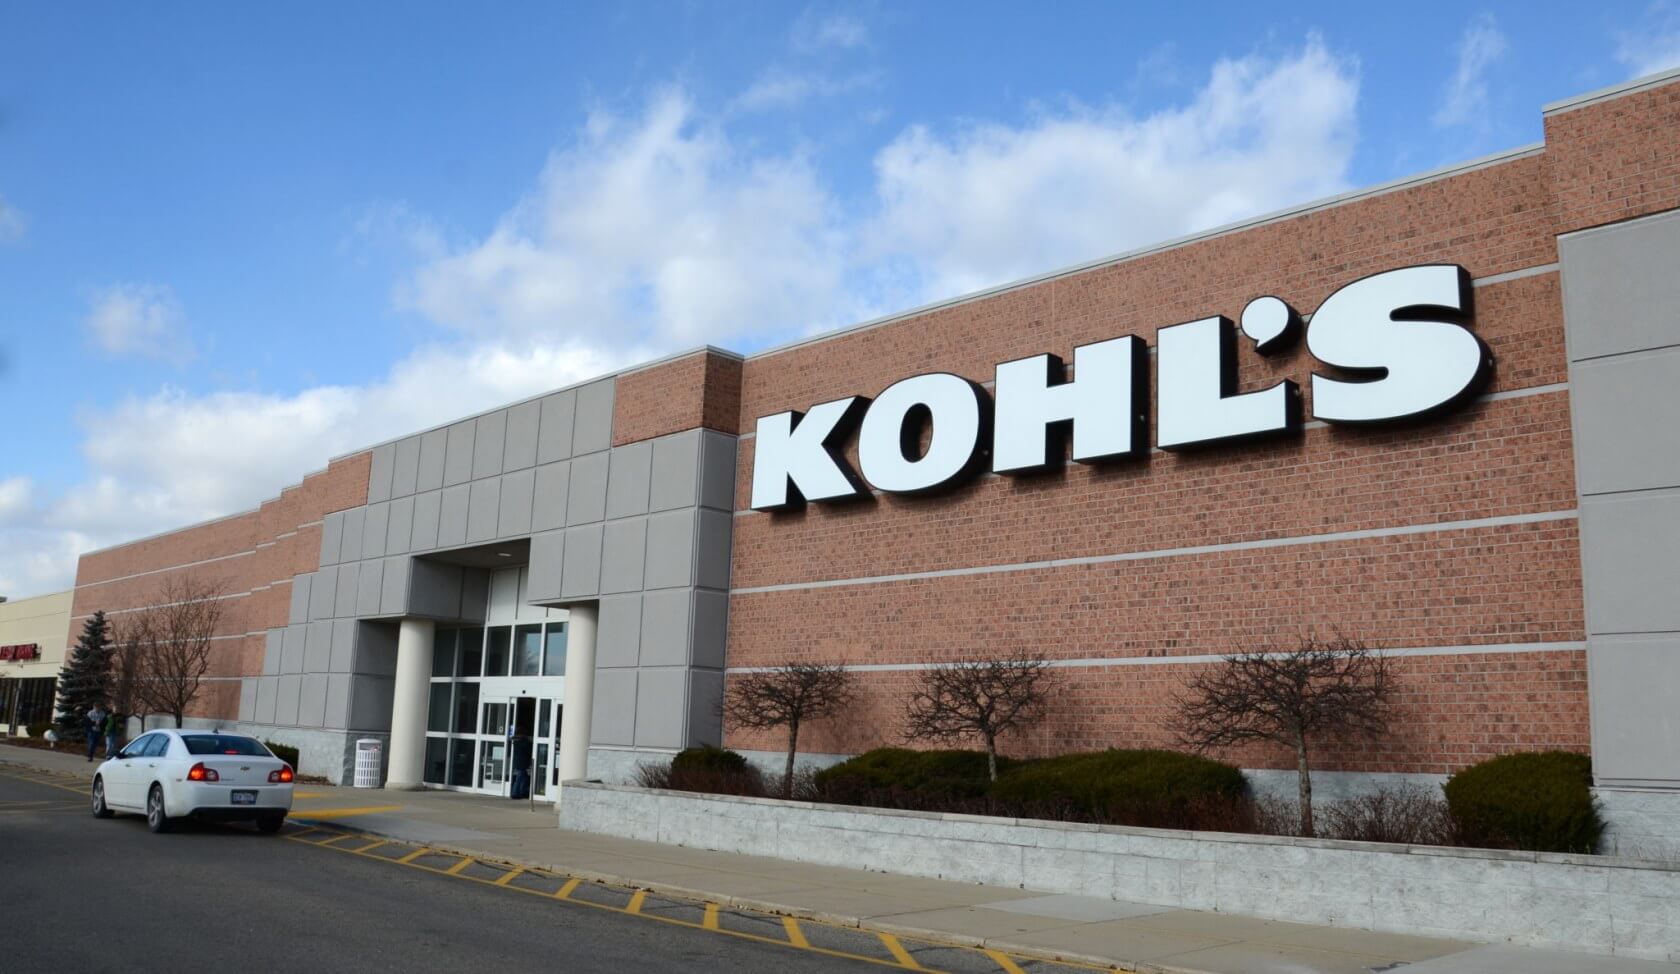 Kohl's will process your Amazon returns for free beginning in July